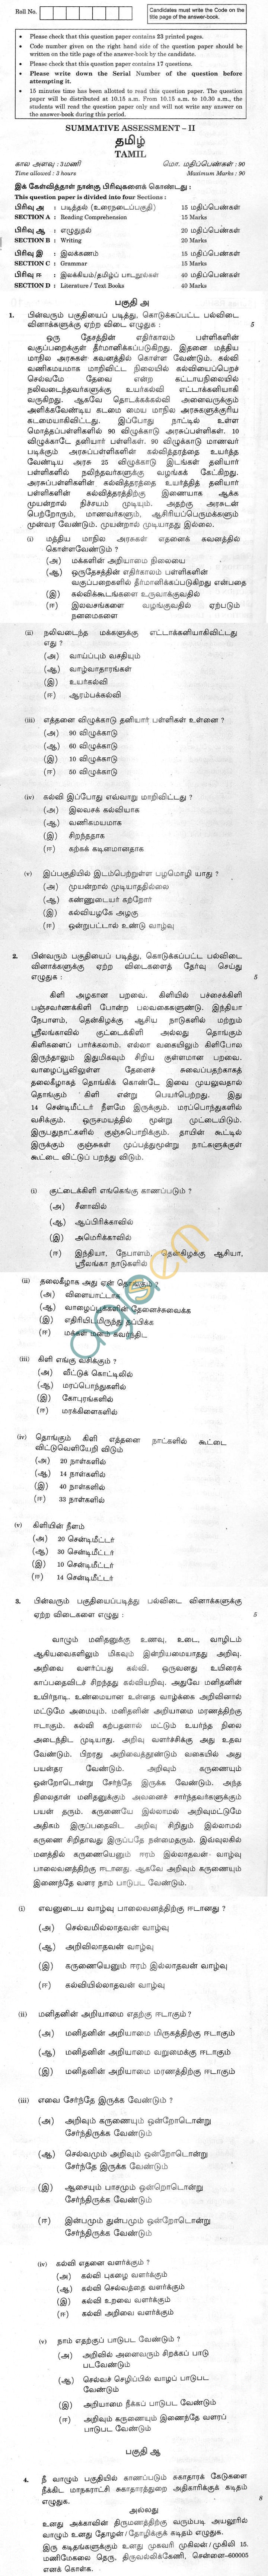 CBSE Compartment Exam 2013 Class X Question Paper - Tamil